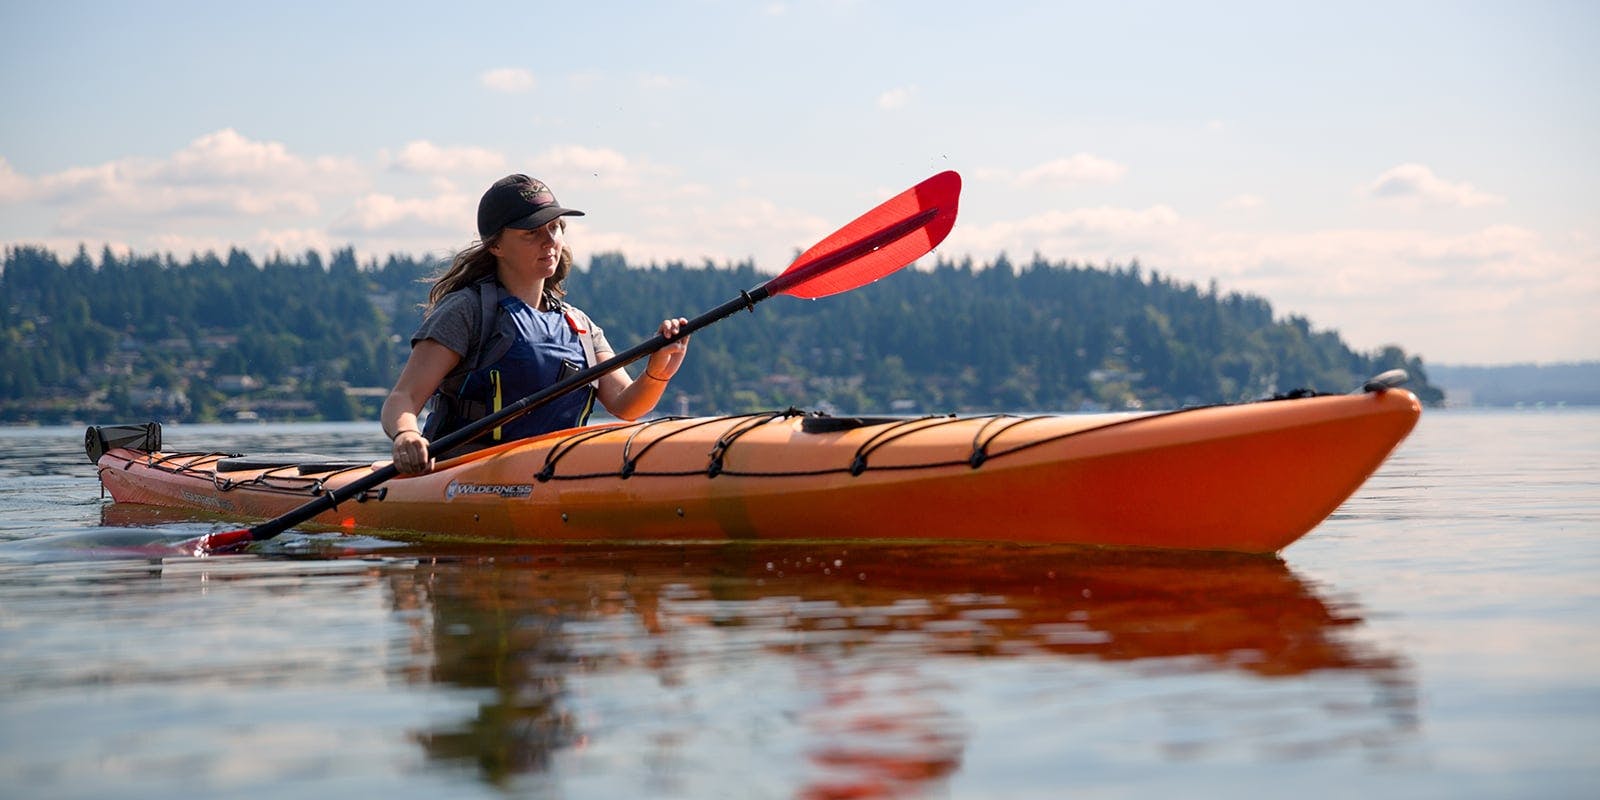 Where to Find the Best Kayaking Trails